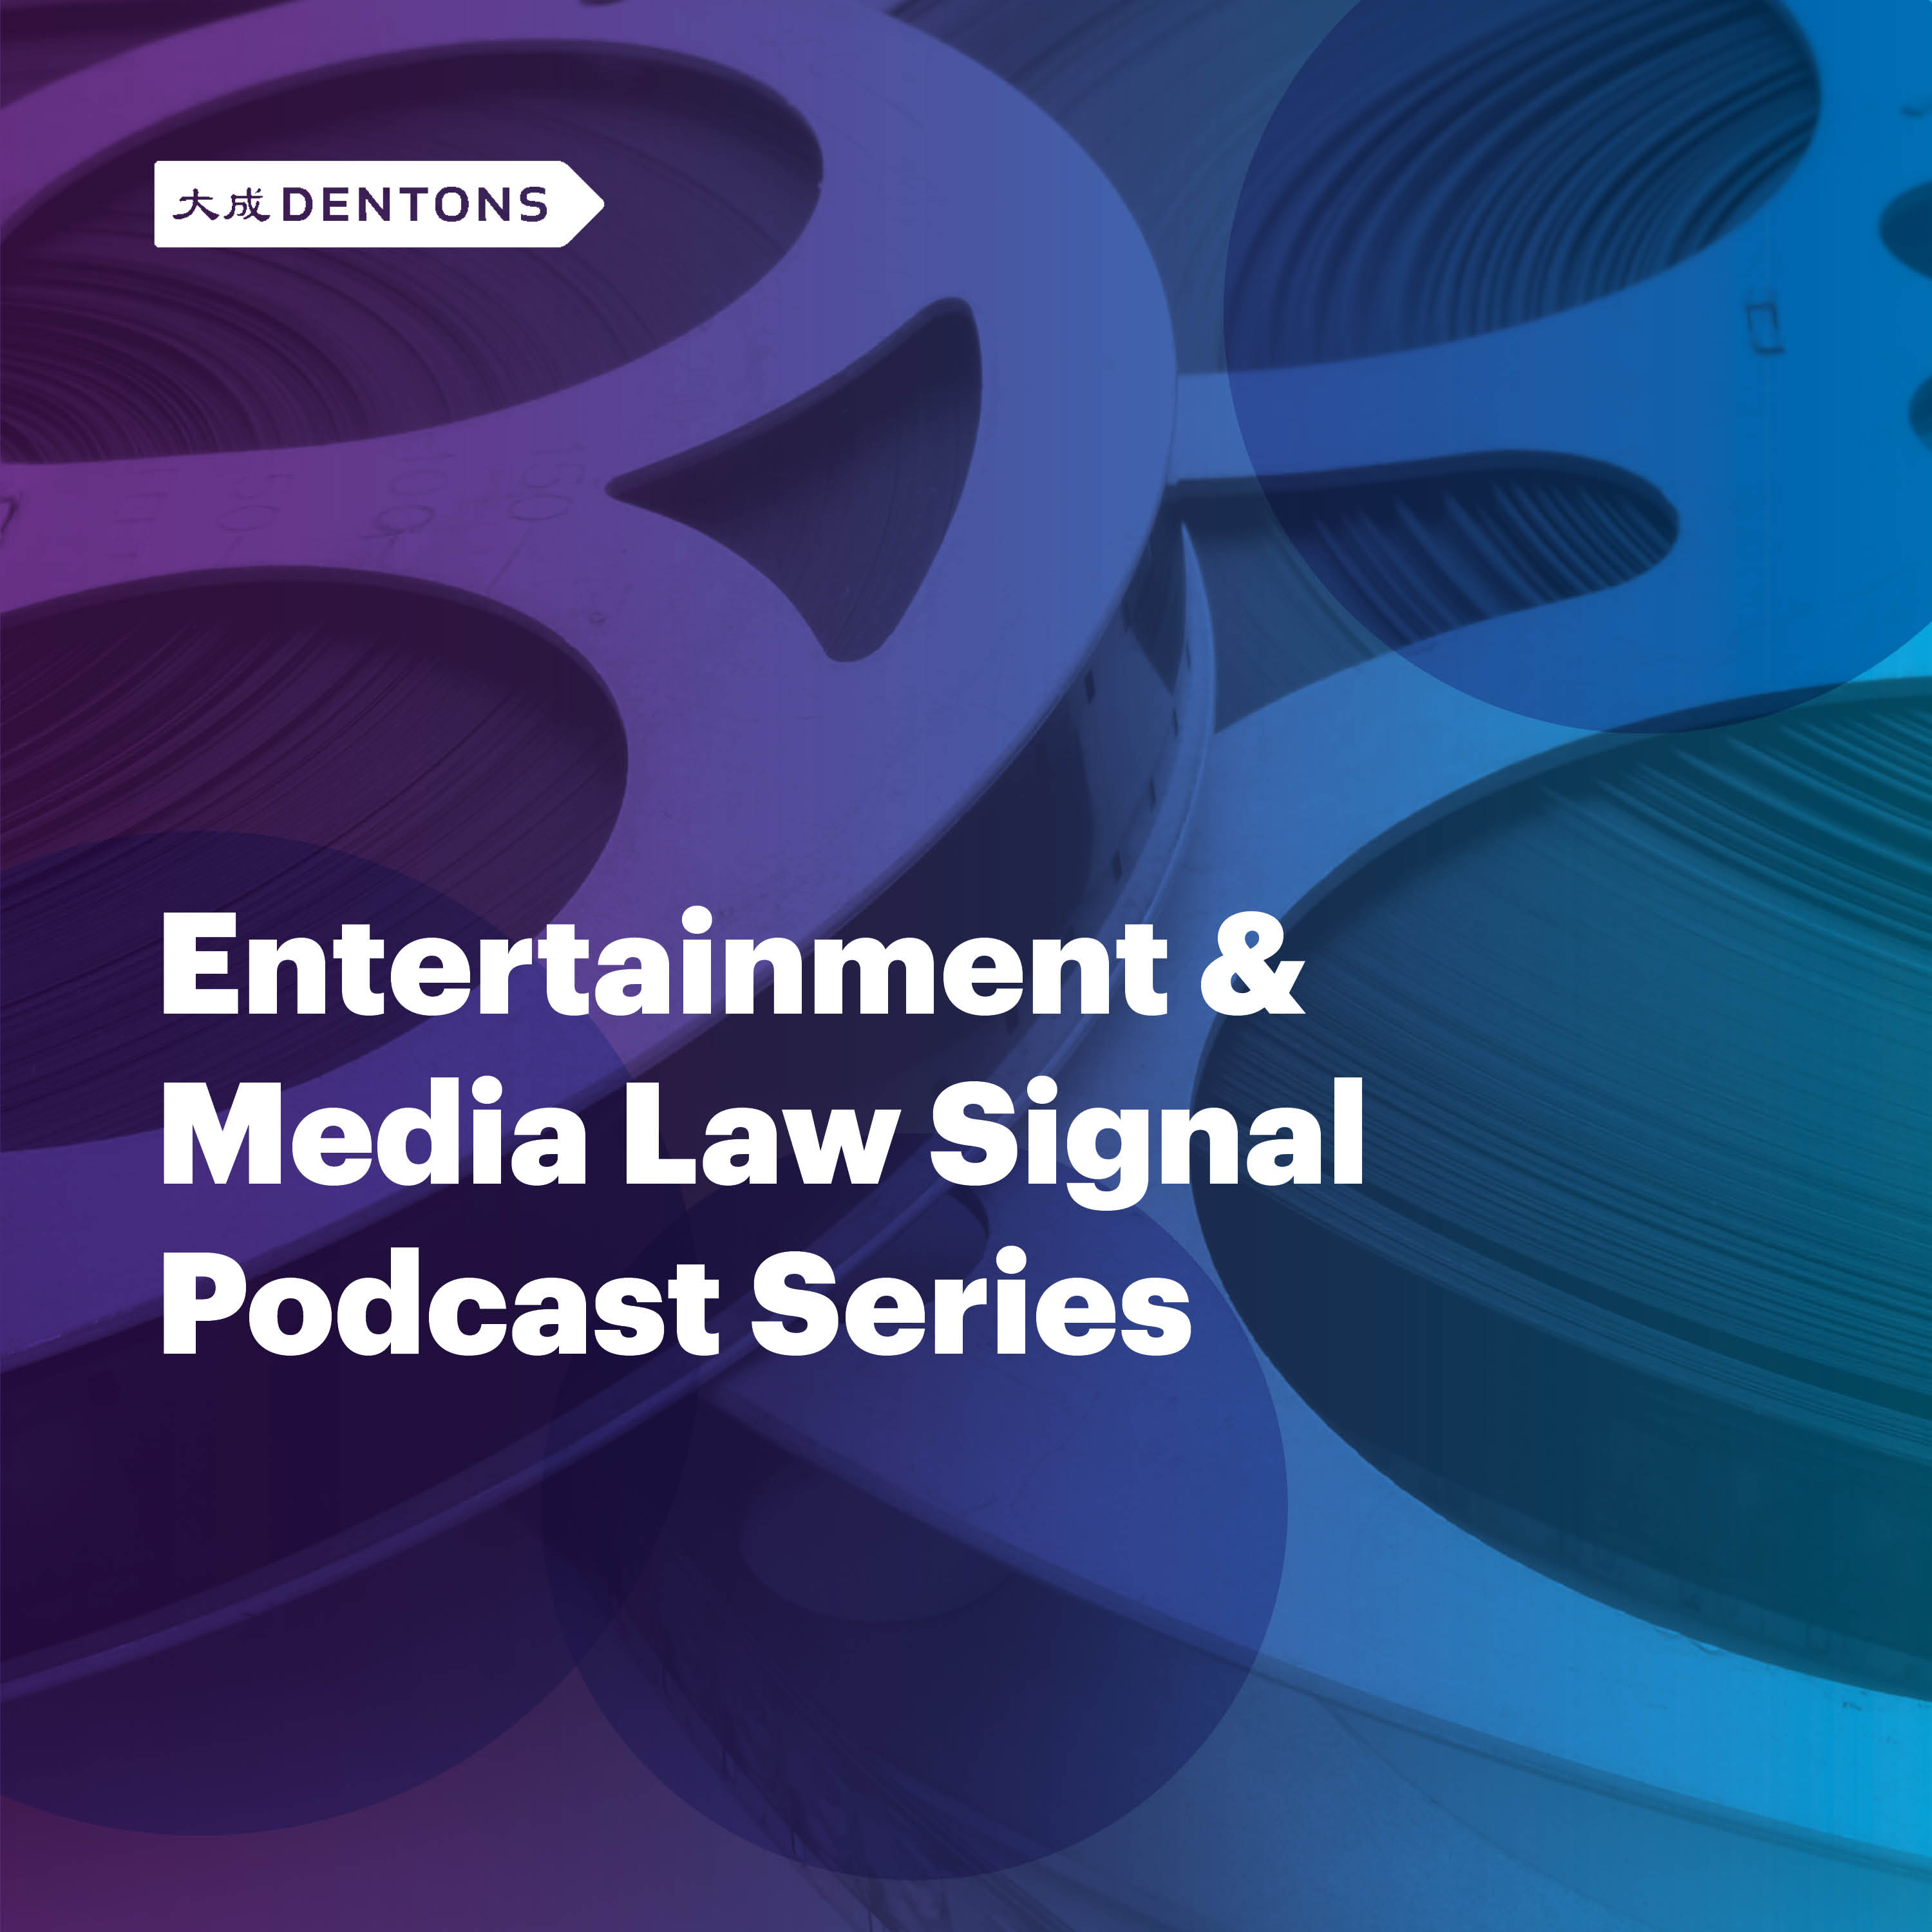 Artwork for podcast Dentons Entertainment & Media Law Signal Podcast Series